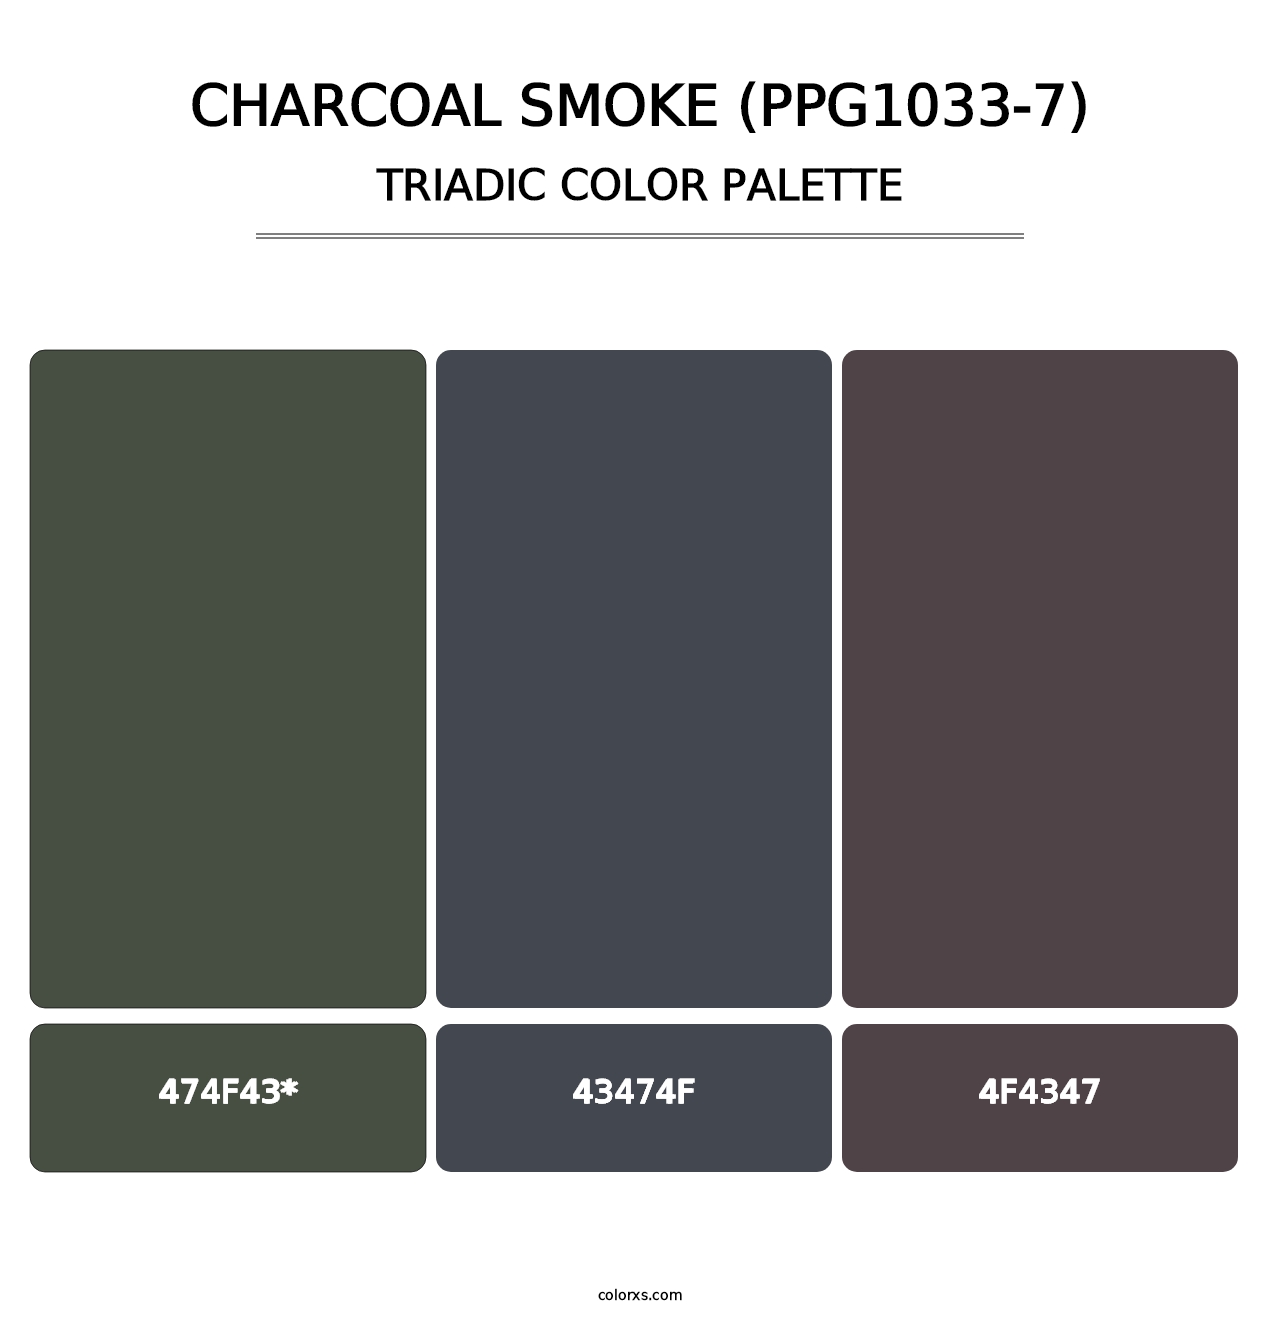 Charcoal Smoke (PPG1033-7) - Triadic Color Palette